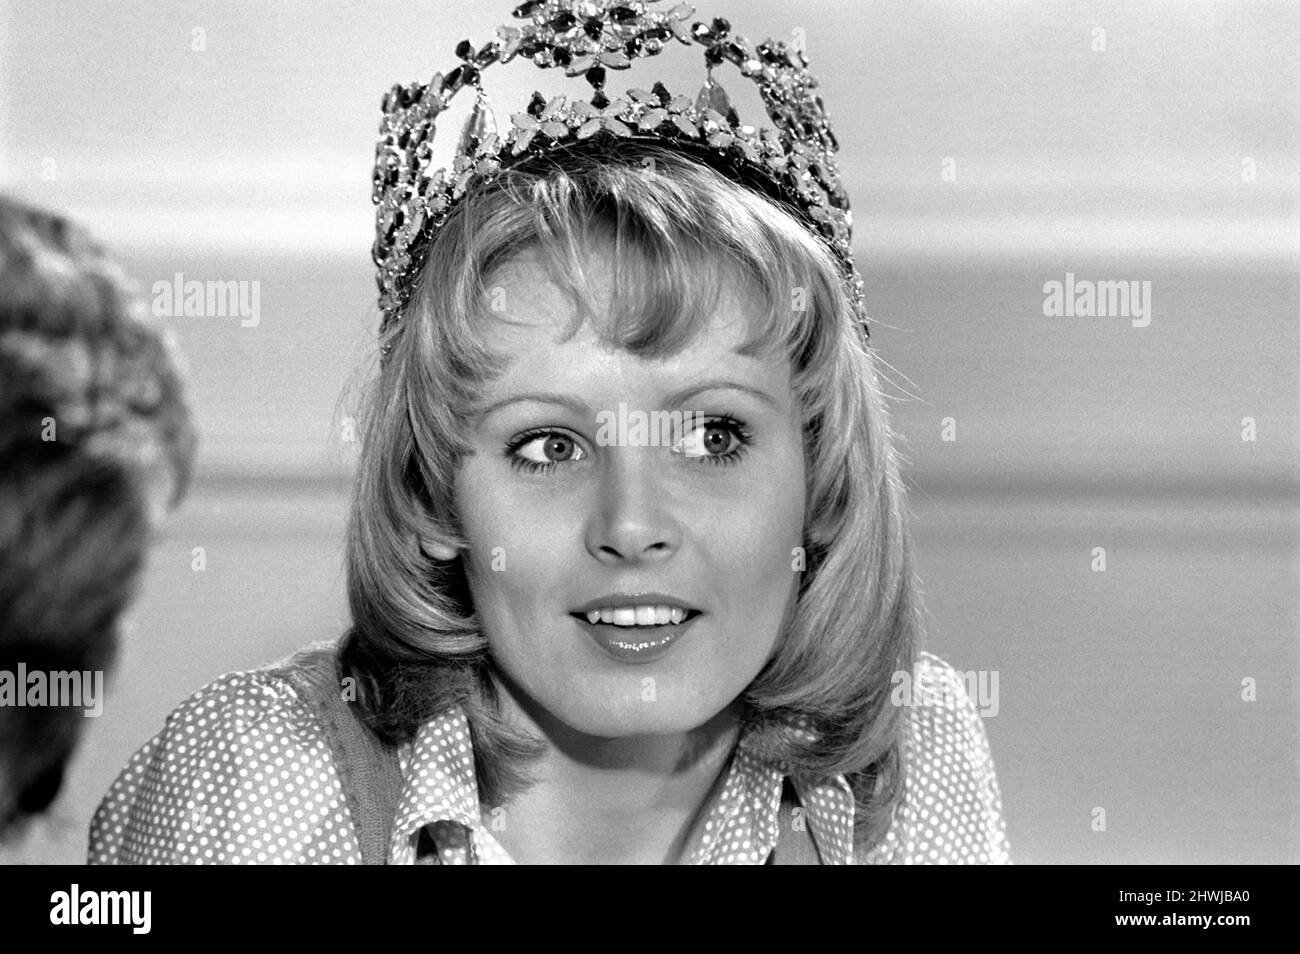 Miss World, 1972: Belinda Green: 20 year old Belinda Green, a blonde haired, blue eyed, model from Australia, won the Miss World Contest. Belinda’s favourite hobby is cooking. Belinda at the Photocall for Miss World, at the Britannia Hotel. December 1972 72-11299-008 Stock Photo